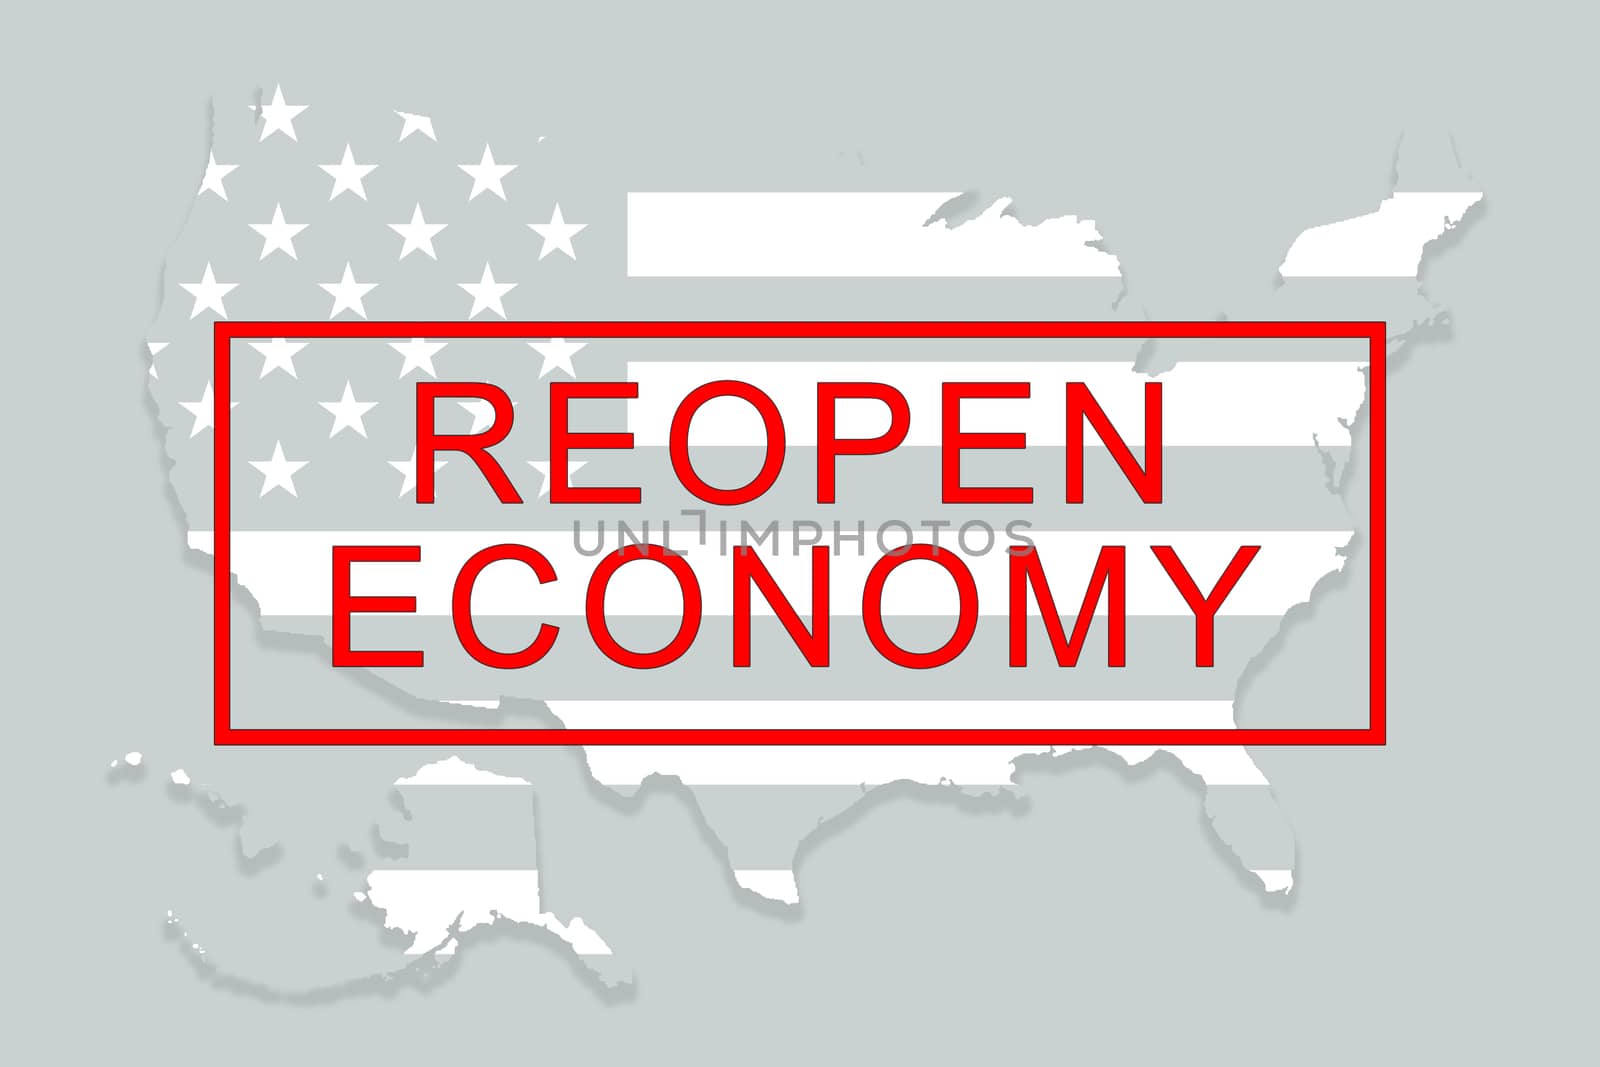 Concept of Opening US economy, reopen United States or American economic activity - back to work after the business lockdown due to covid-19 or coronavirus pandemic. by lakshmiprasad.maski@gmai.com